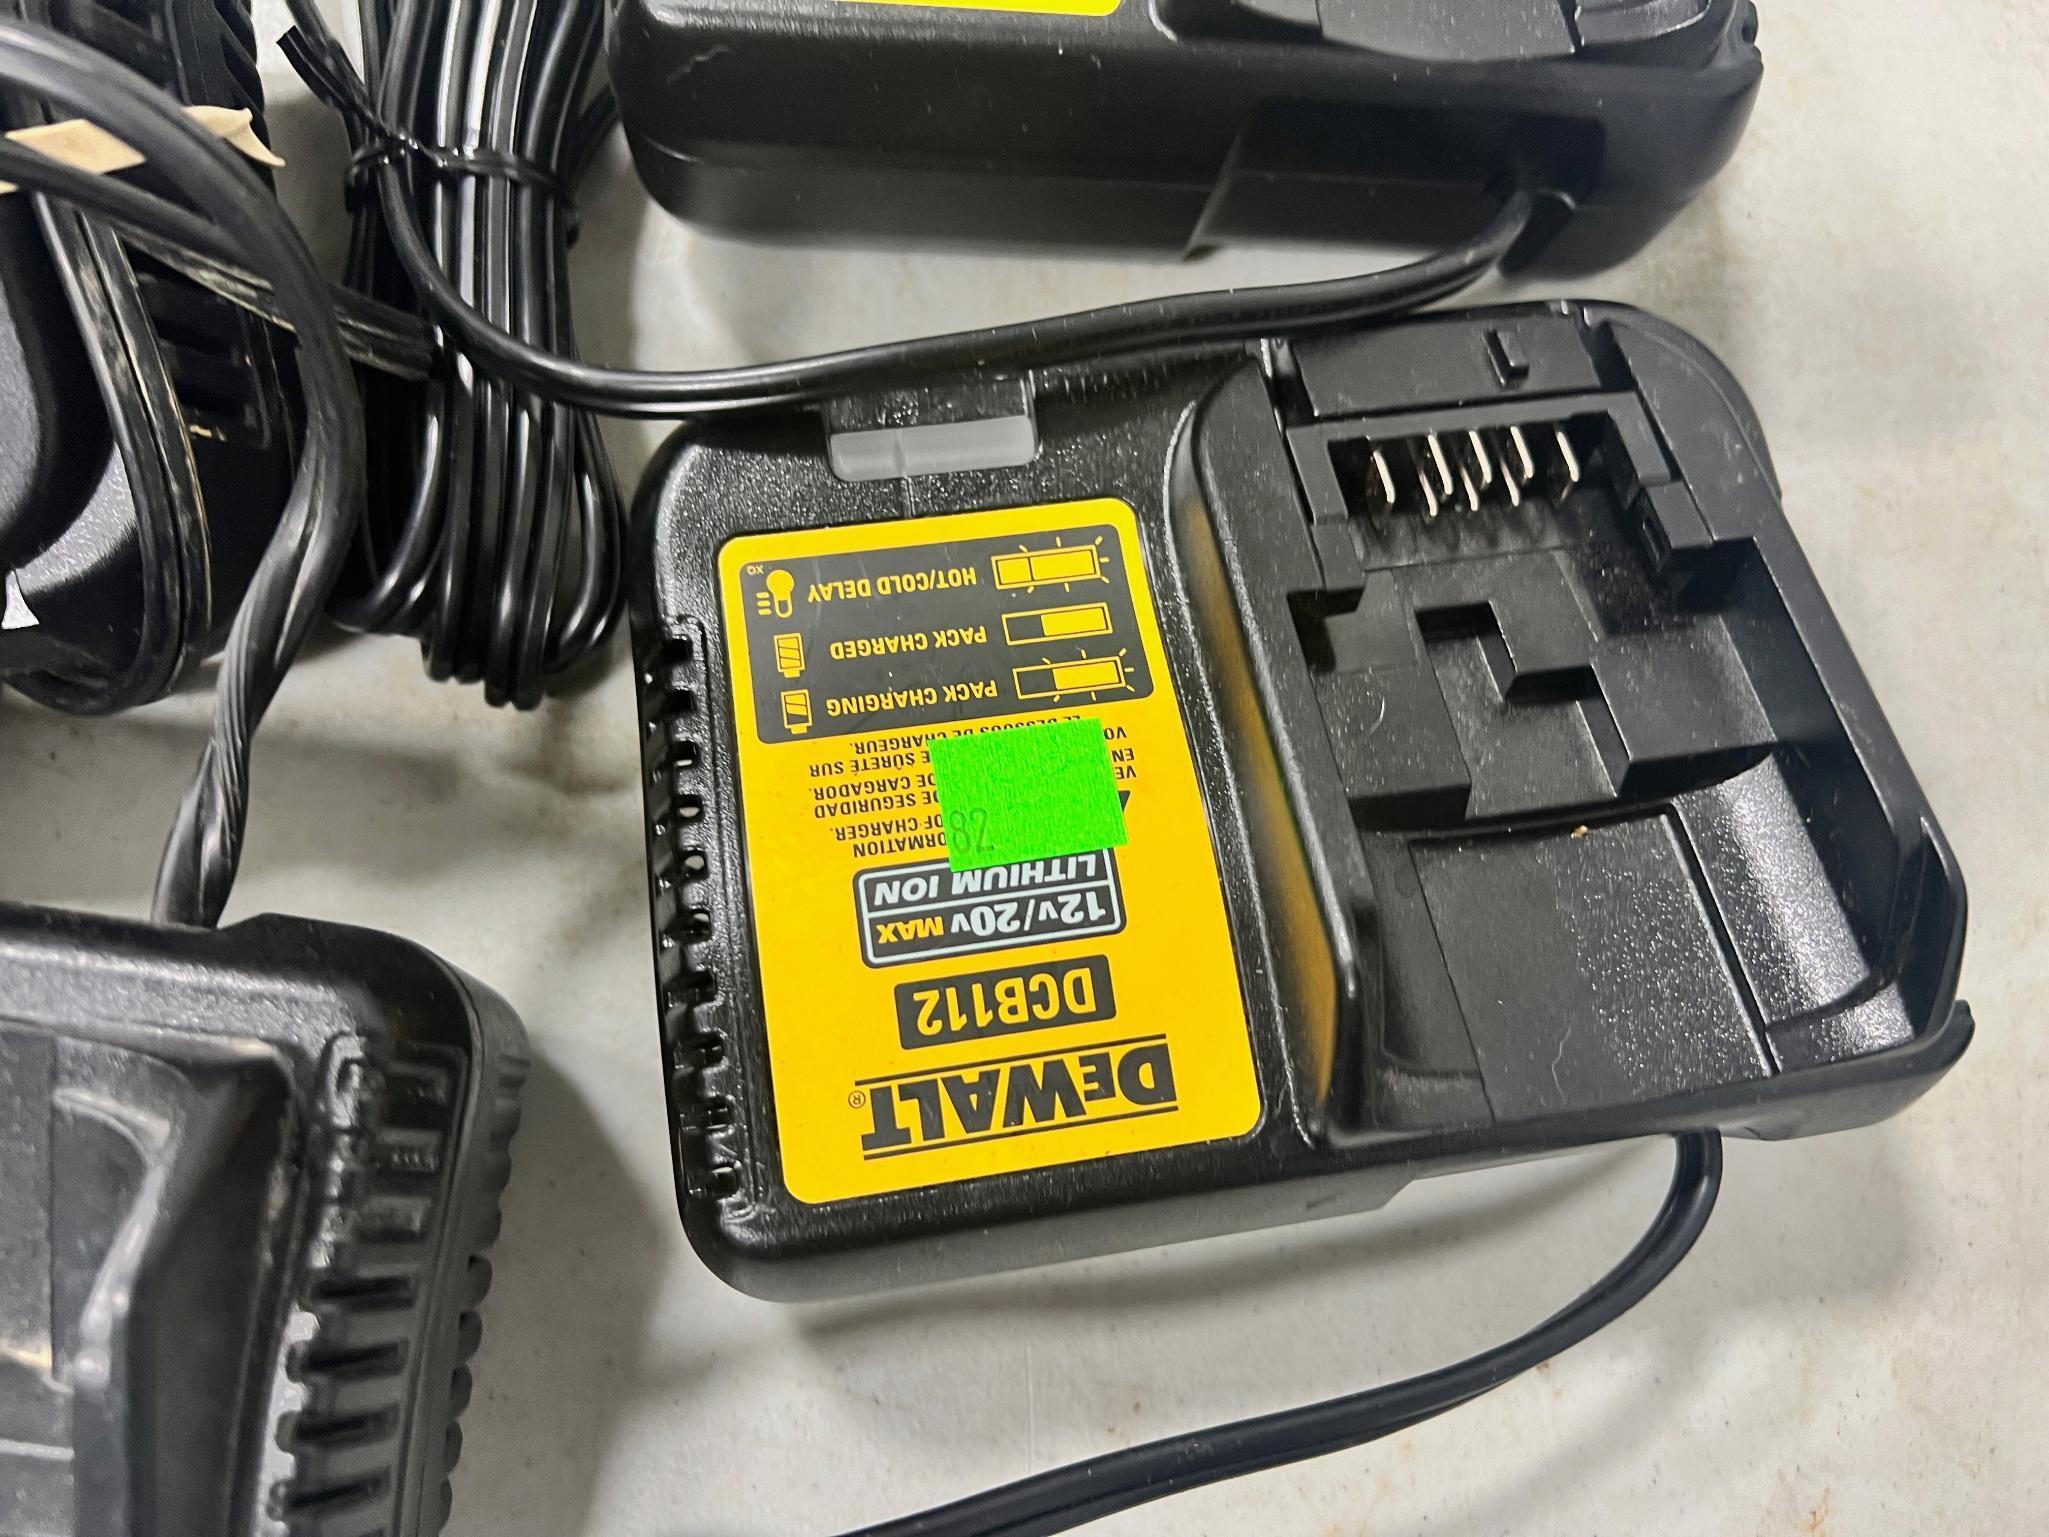 4- Dewalt 20V chargers, 2- DC115 and 2-DC112